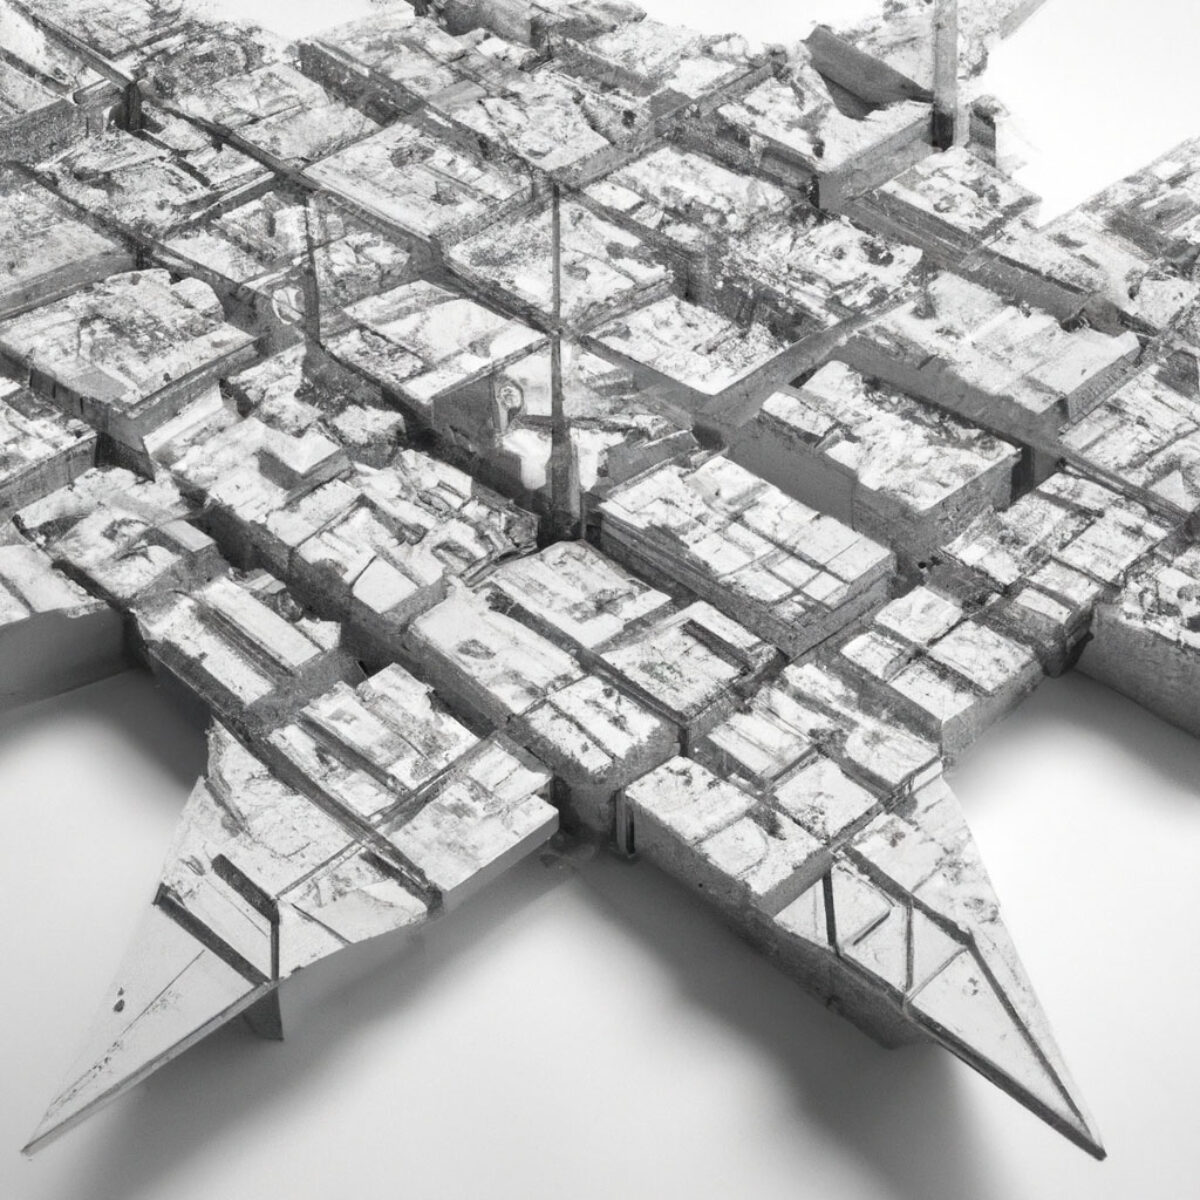 An AI-generated image of what appears to be a cityscape from above with many detailed structures arranged around a complicated geometric plan.